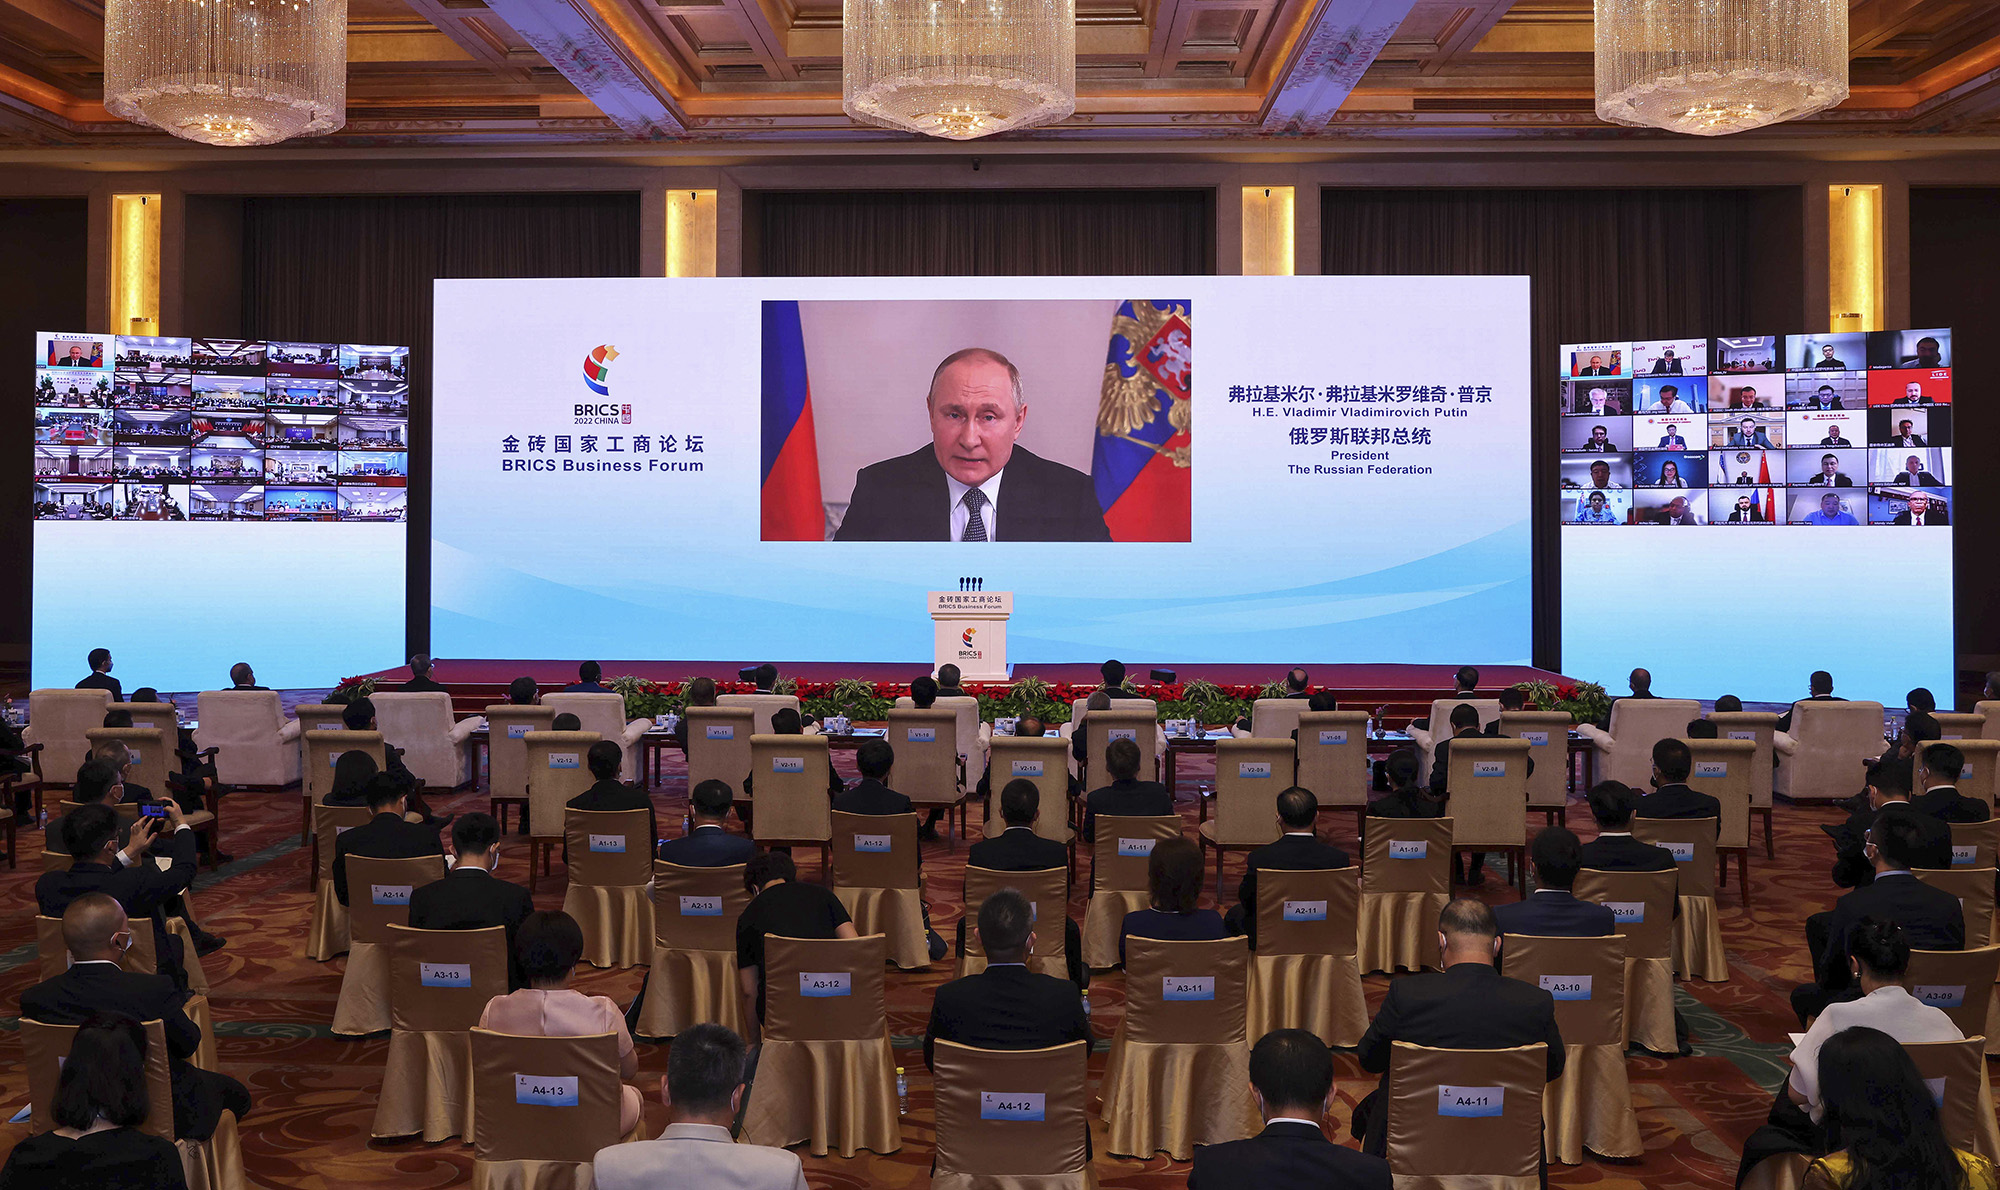 Russian President Vladimir Putin delivers a keynote speech in virtual format at the opening ceremony of the BRICS Business Forum in Beijing, China, on June 22.